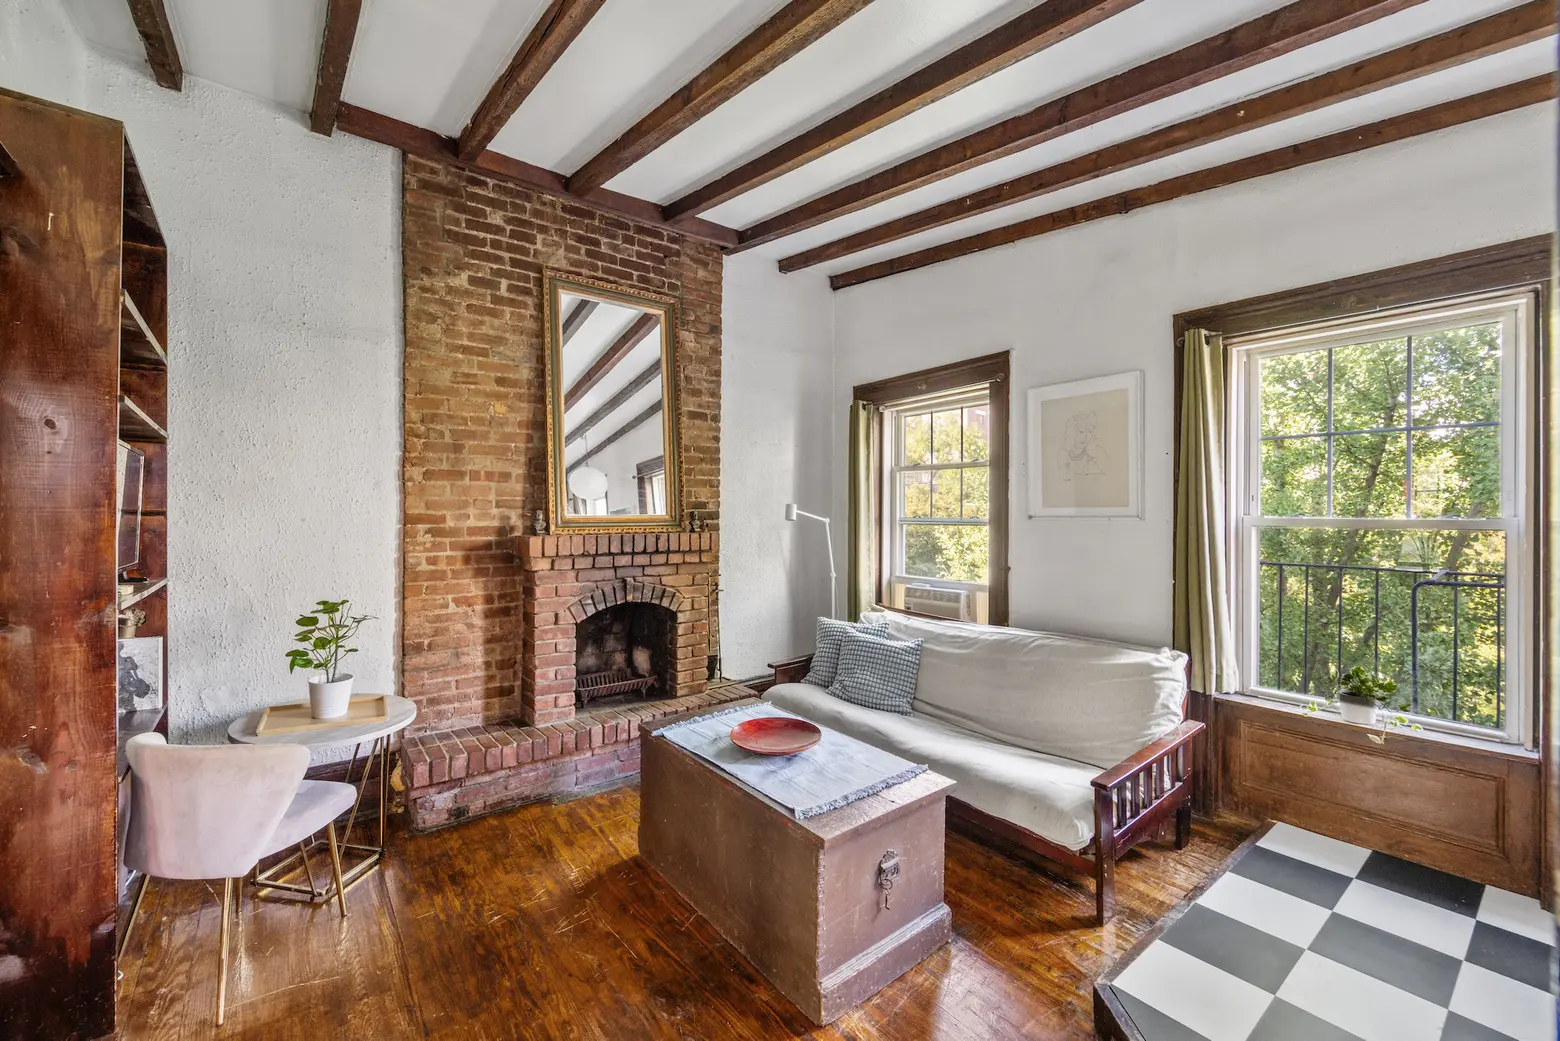 For the price of a two-bedroom condo, this $2.5M Kips Bay property is a townhouse with potential